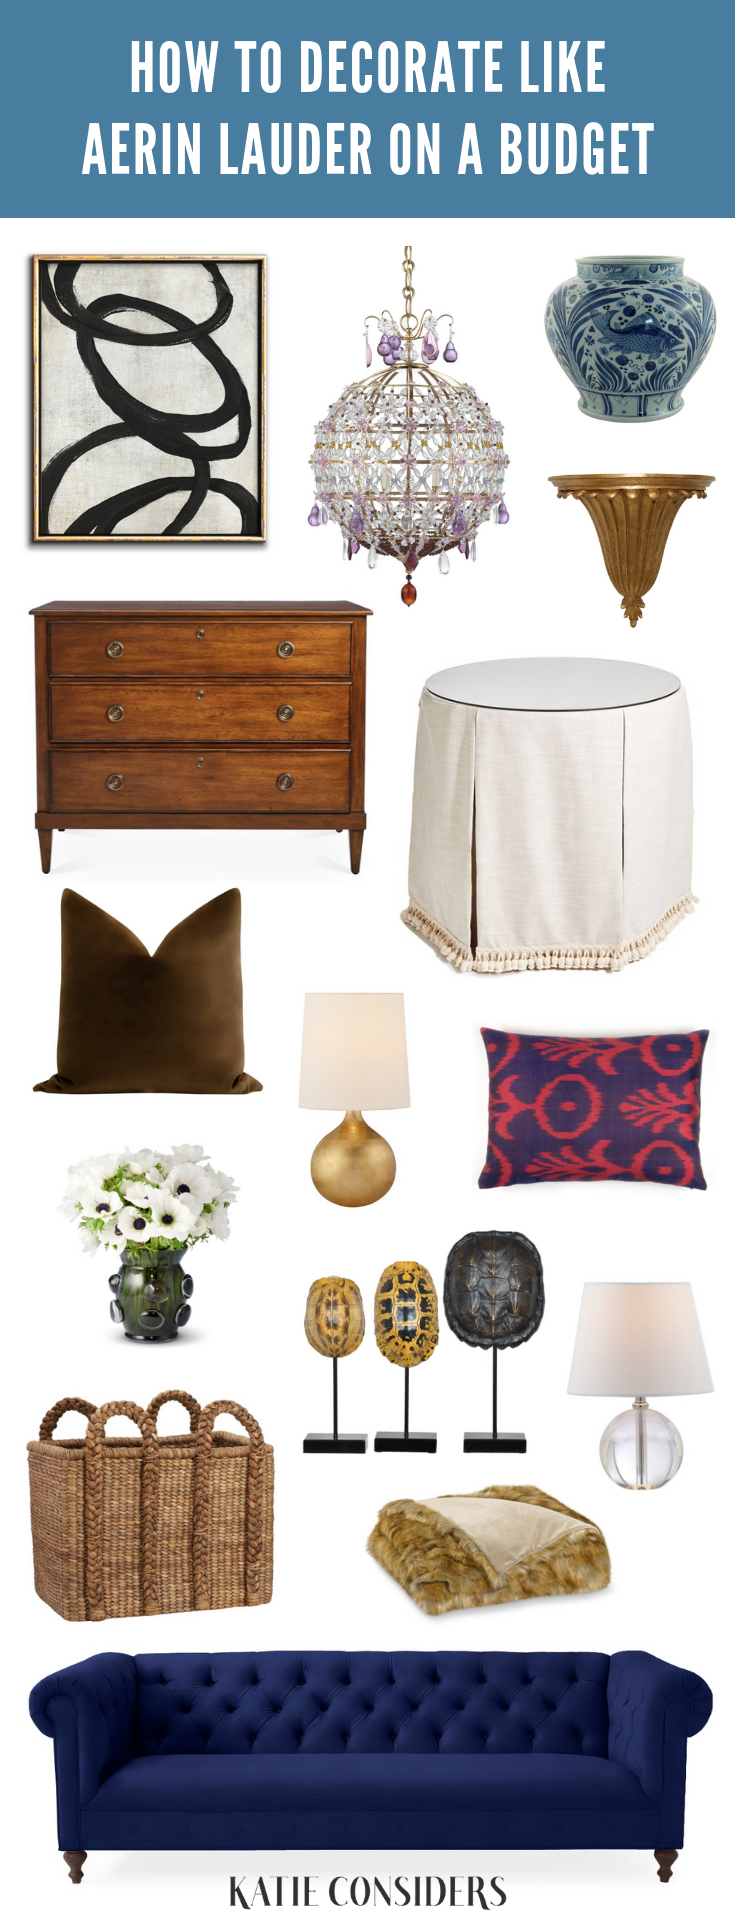 How to decorate like Aerin Lauder on a budget - How to decorate like Aerin Lauder on a budget -   19 style Classic home ideas